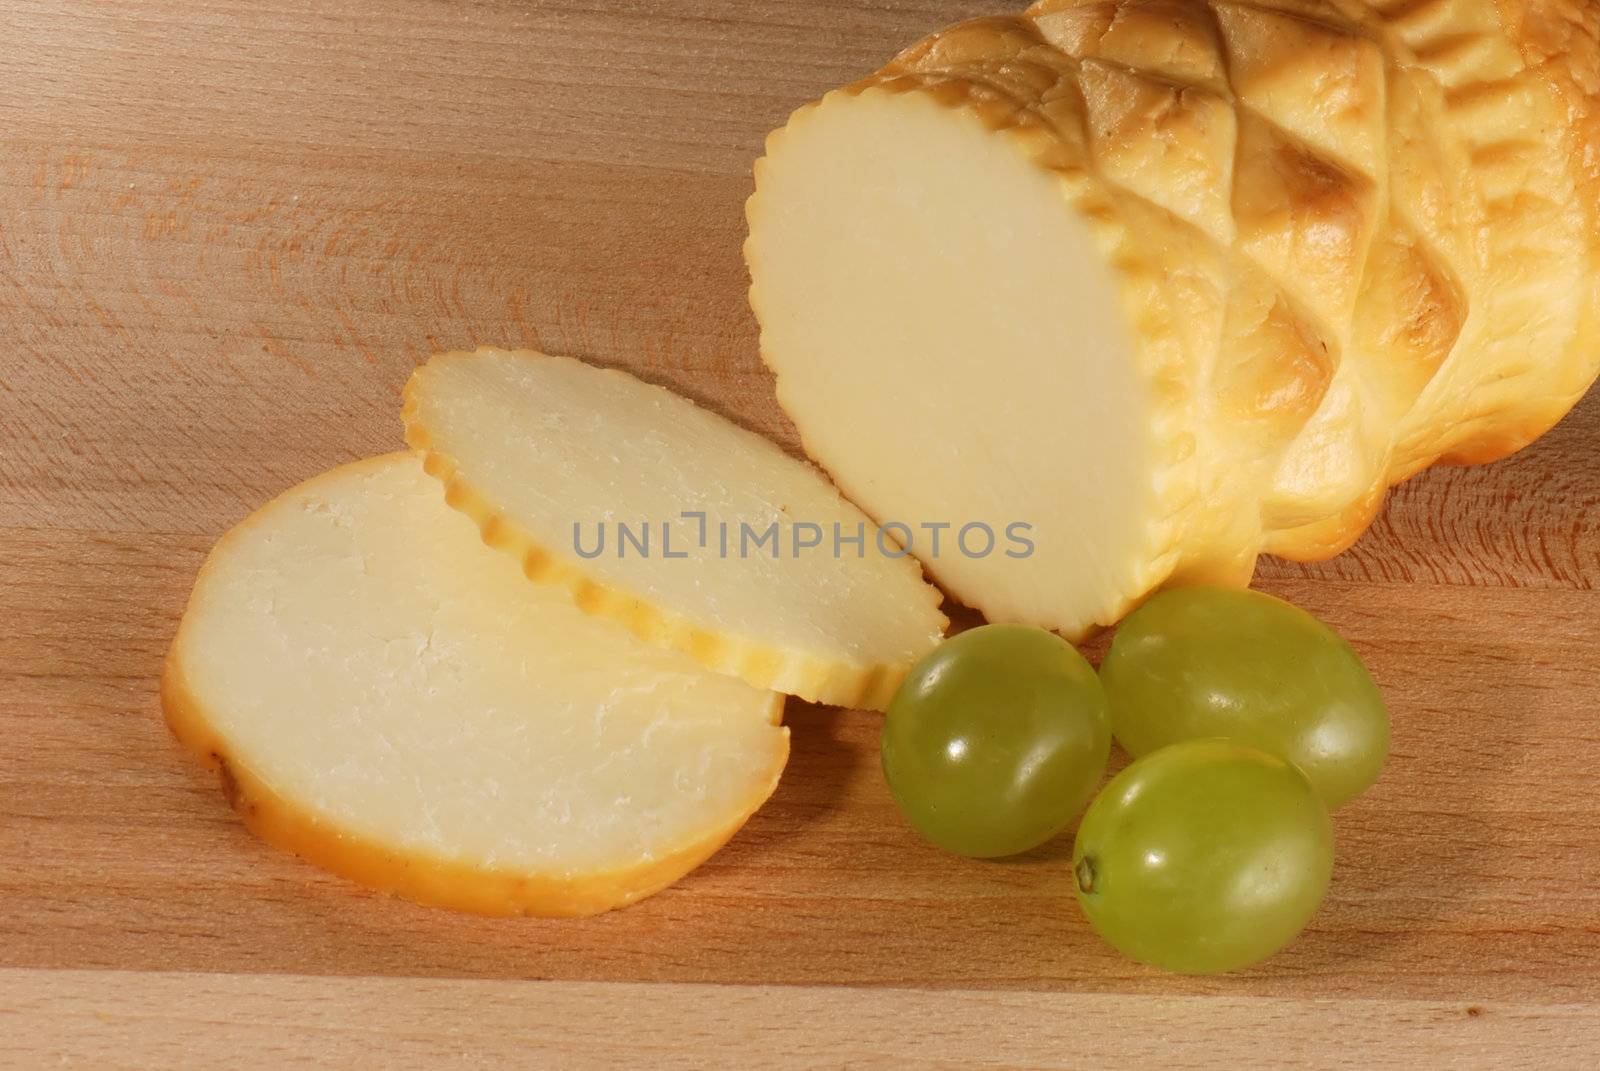 Traditional Polish cheese known as oscypek on a wooden board